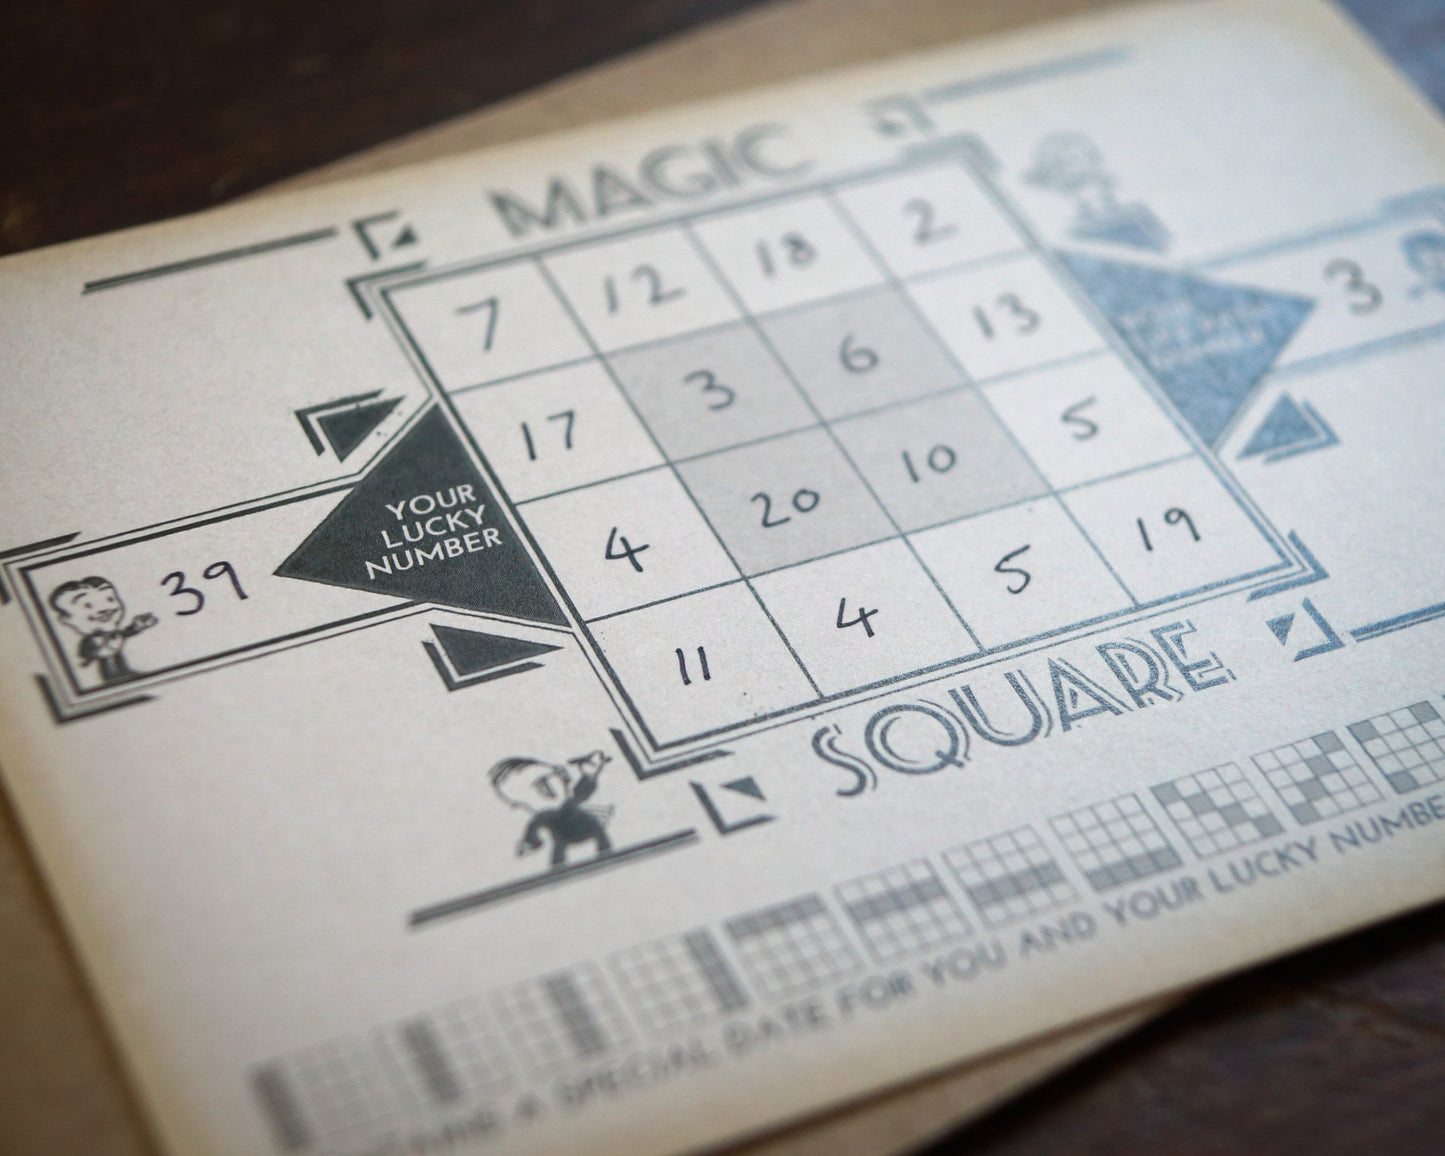 20 x Personalised Date Magic Square Postcards and Envelopes